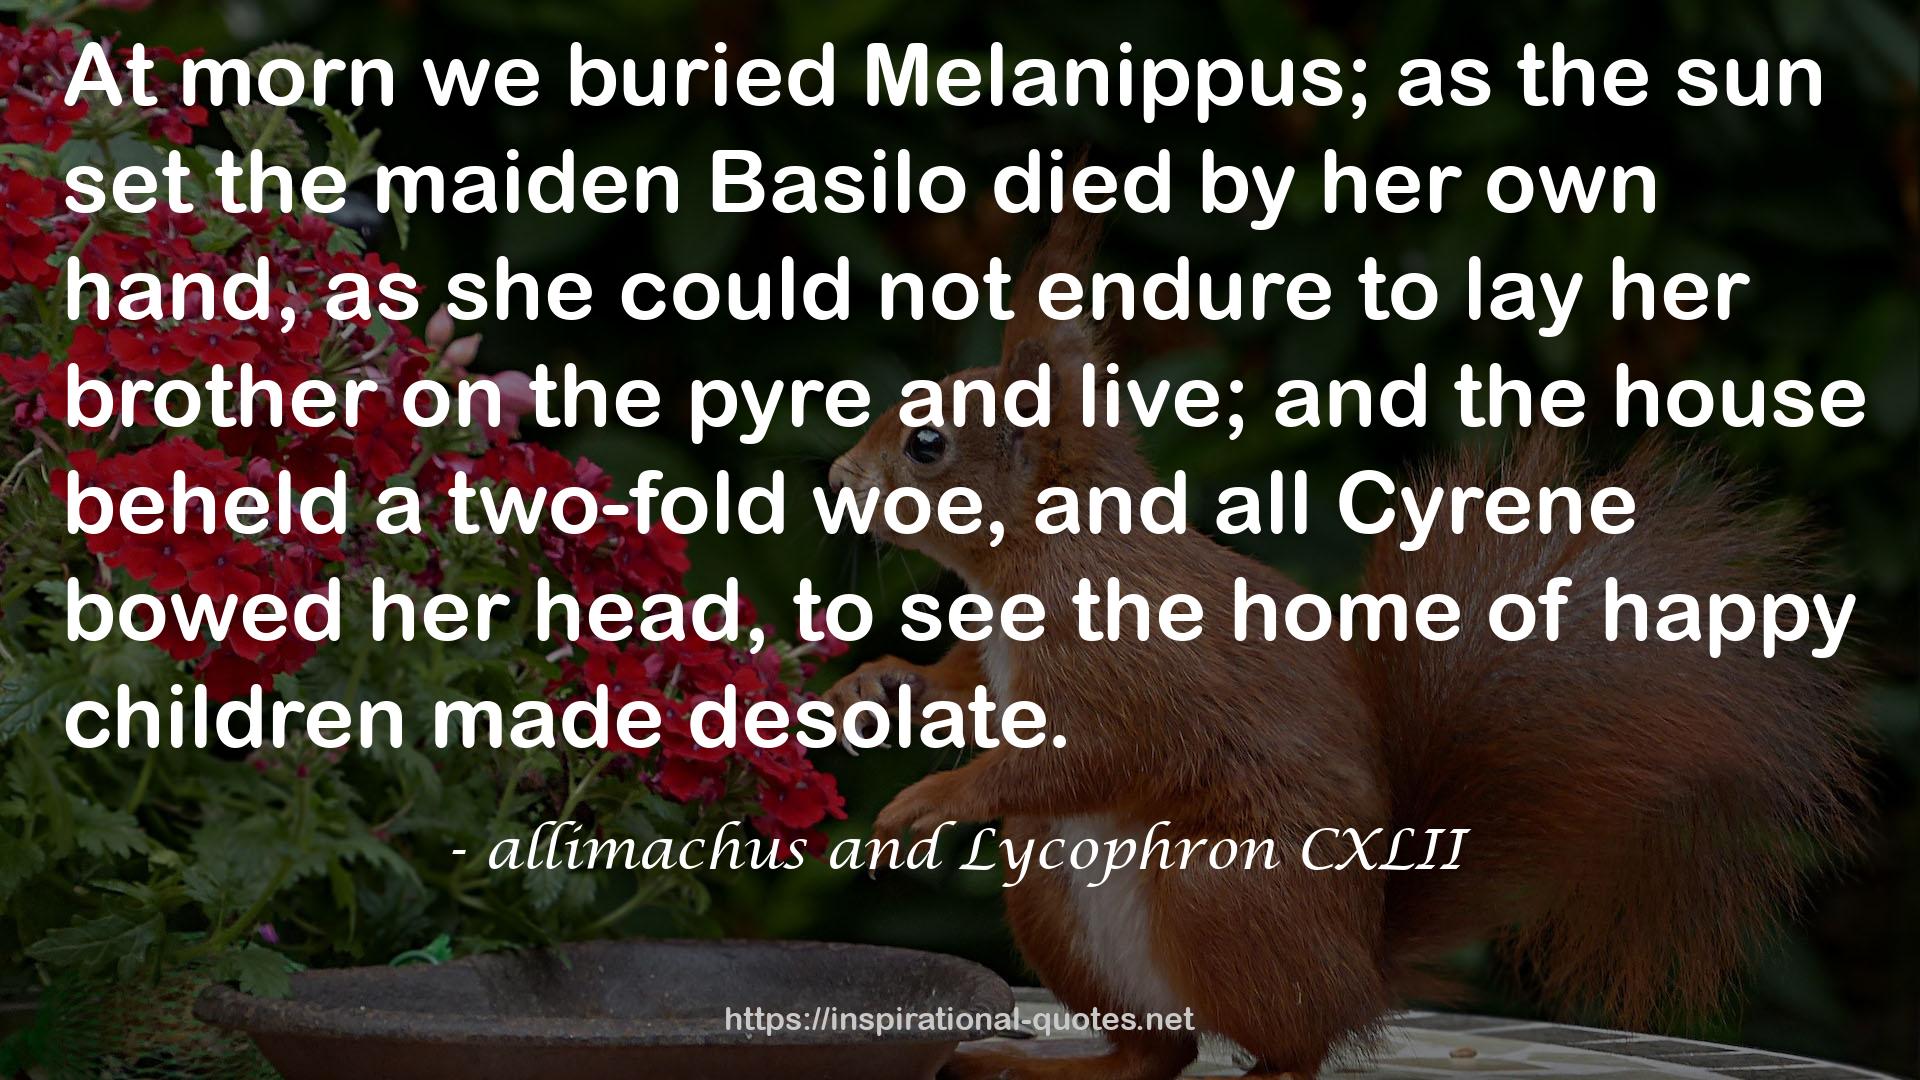 allimachus and Lycophron CXLII QUOTES